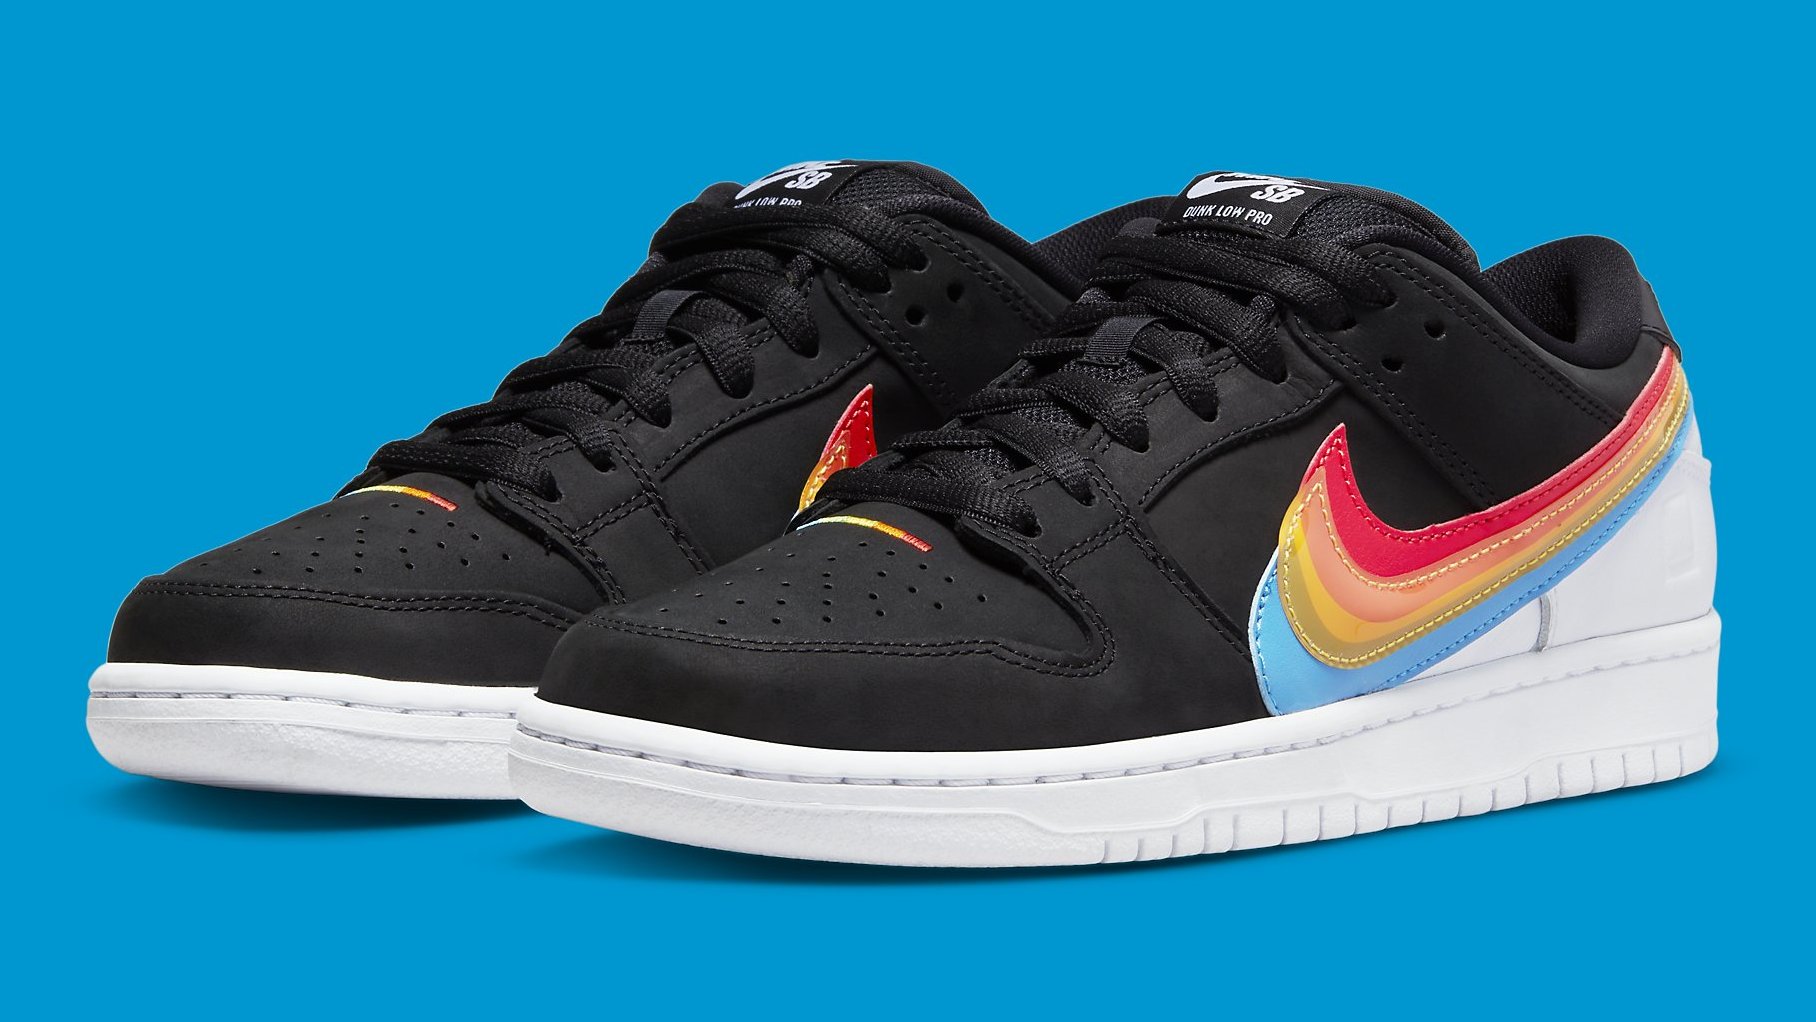 Polaroid x Nike SB Dunk Release Gets Pushed Back | Complex